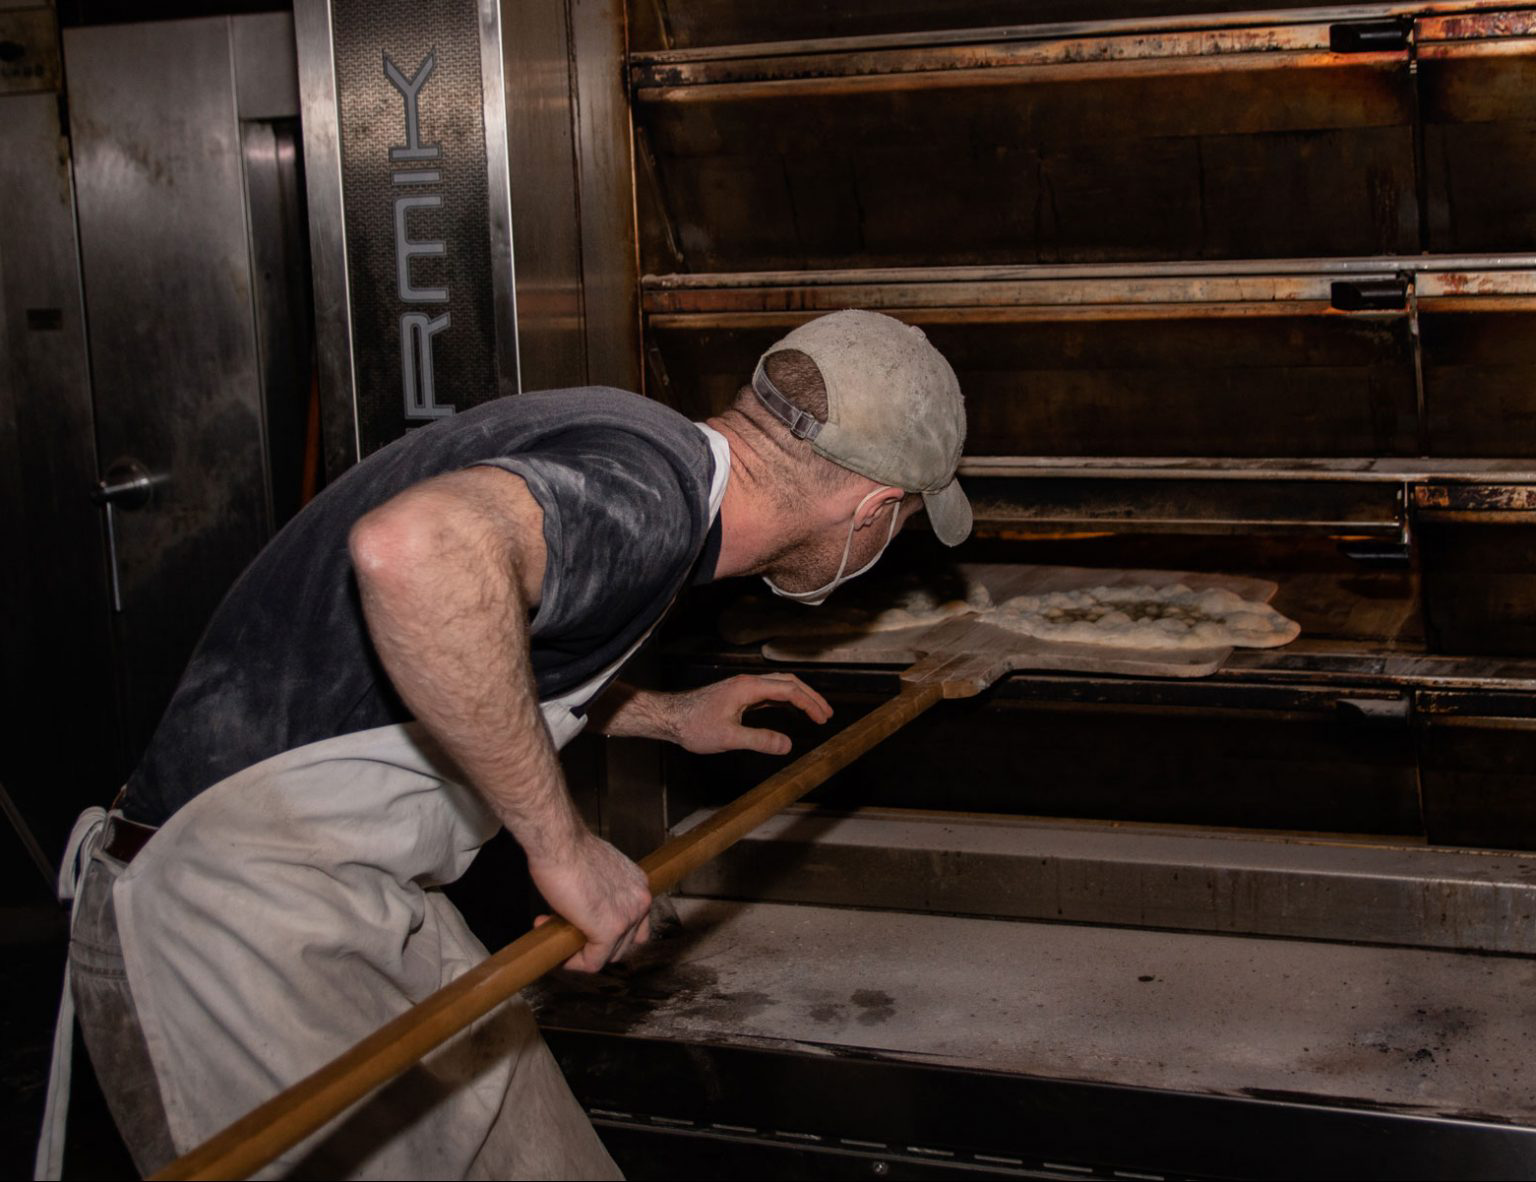 A baker placing pizzas in a large oven.